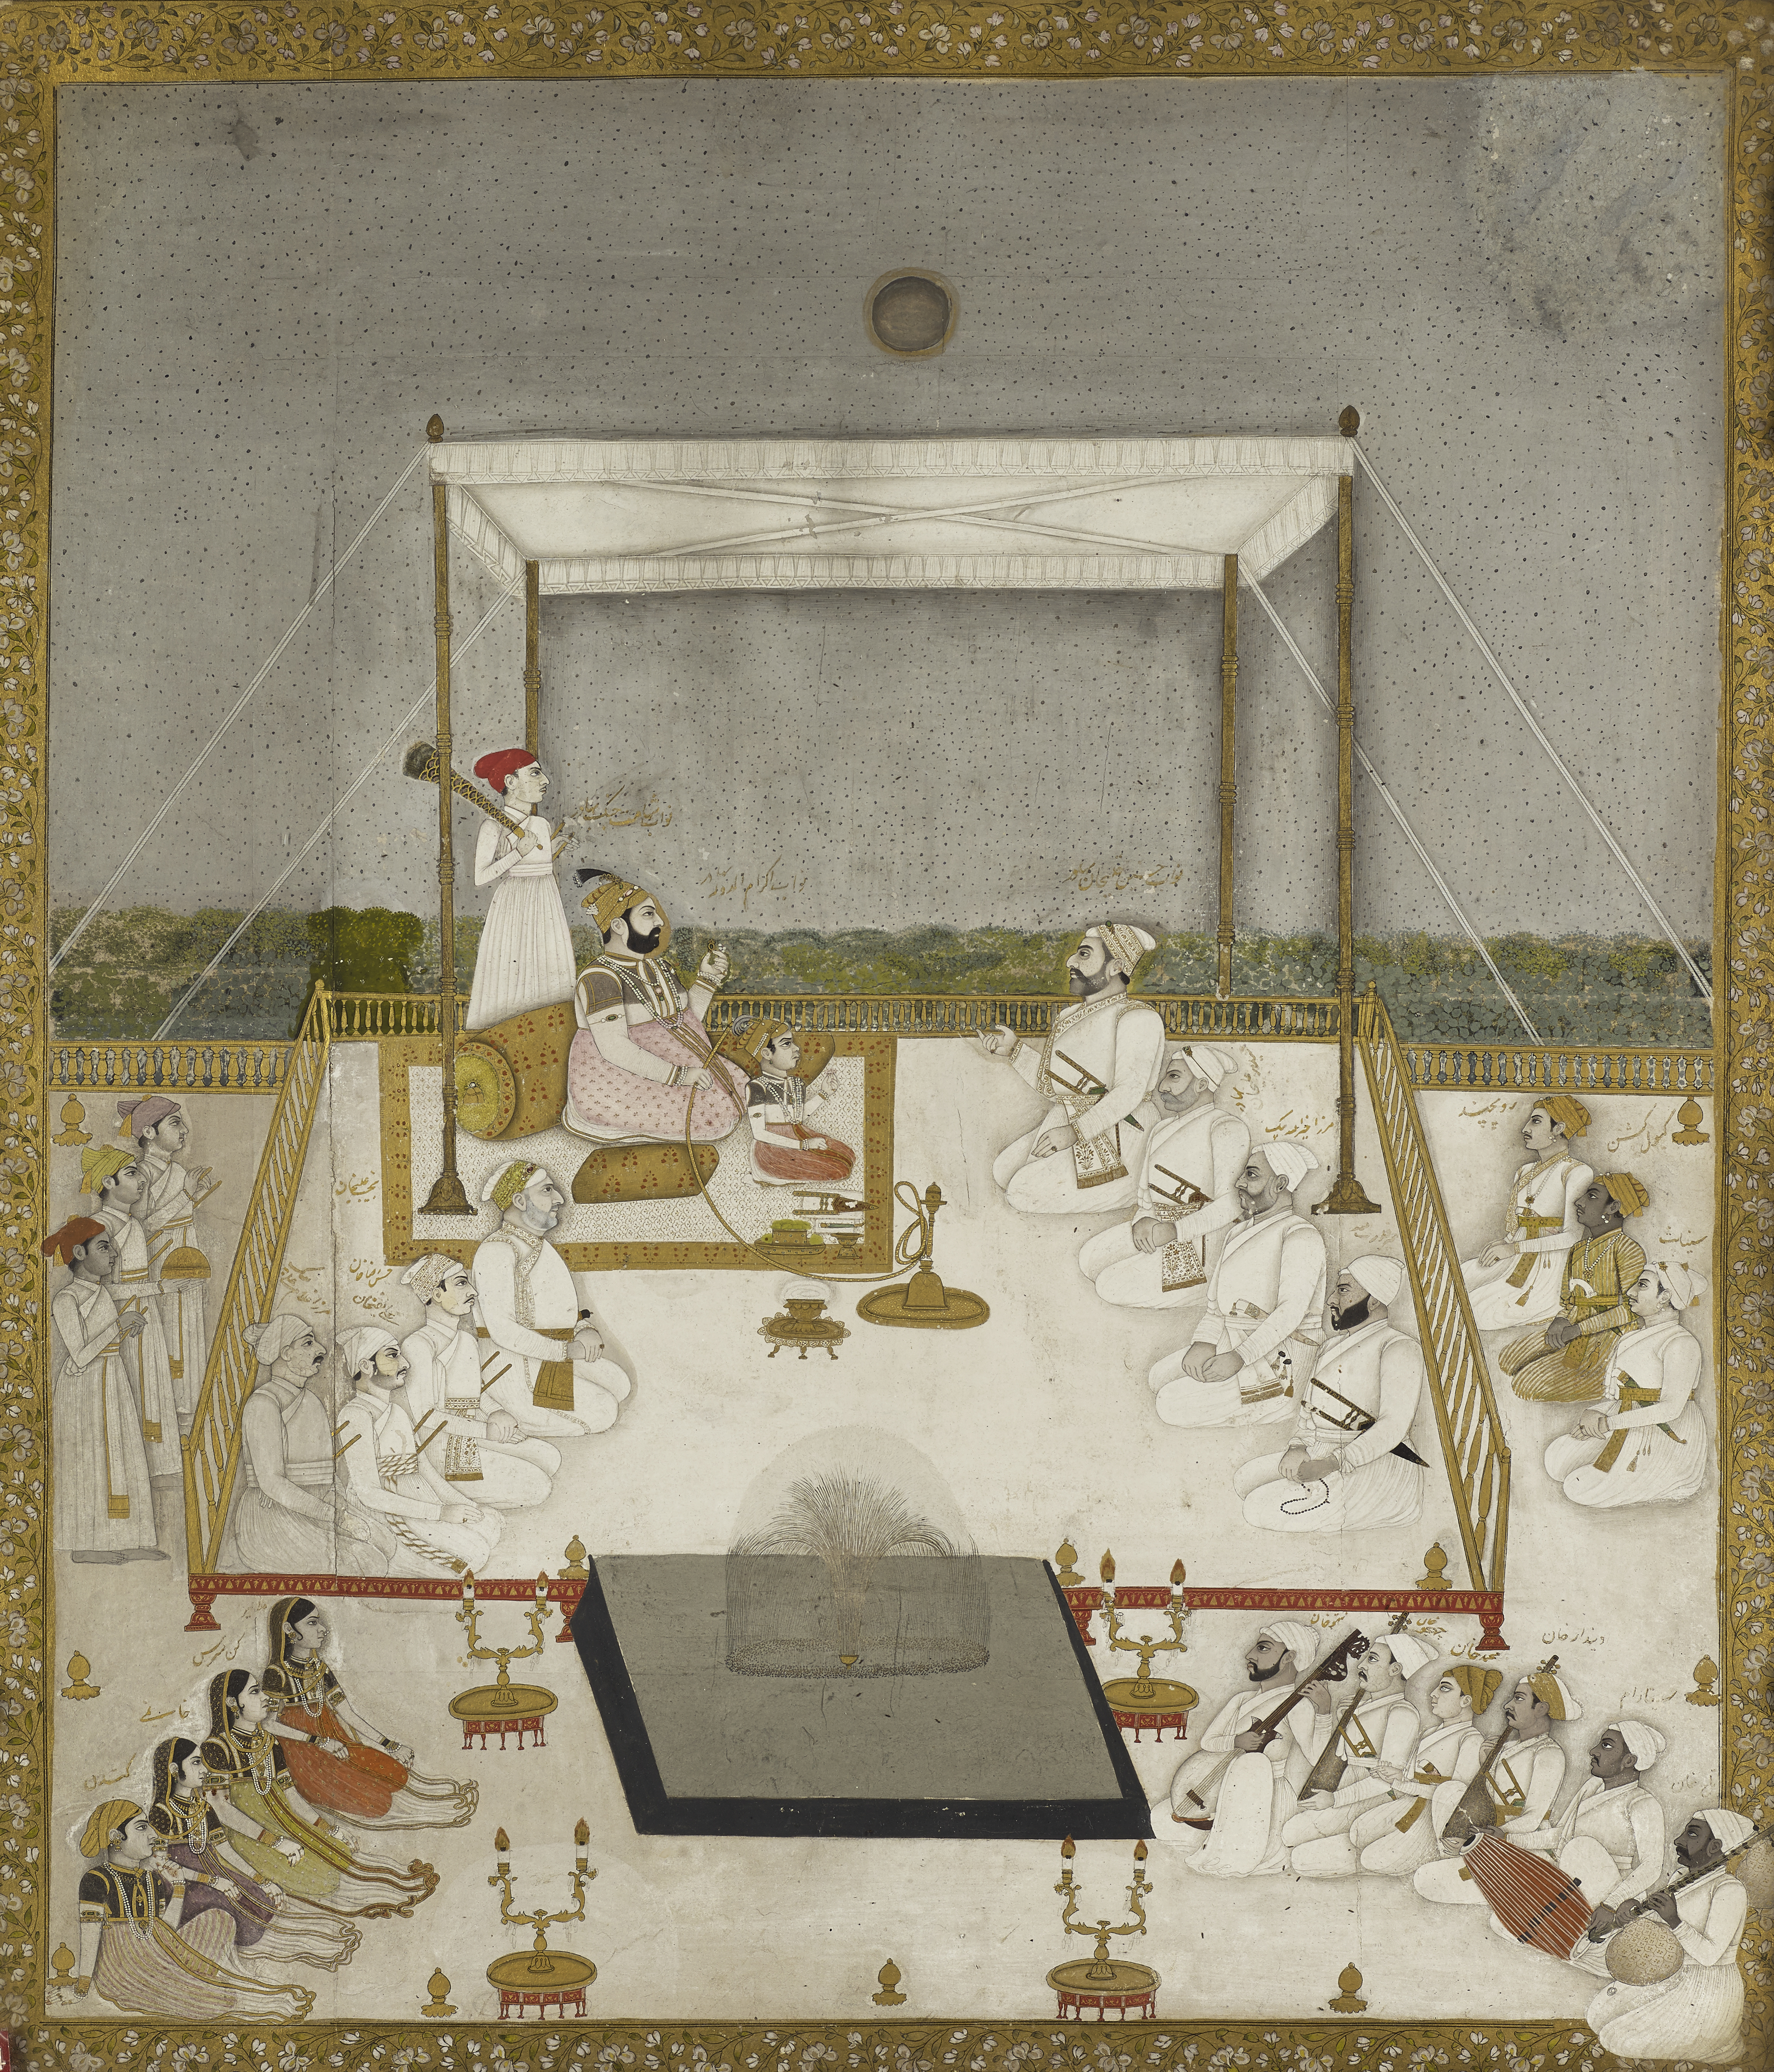 Miniature painting: Shahamat Jang with his nephew and adopted son Ikram al-Daula on a terrace with an official, by a Murshidabad artist, circa 1750-55. Photography by John McKenzie for Lyon & Turnbull Fine Art Valuers.